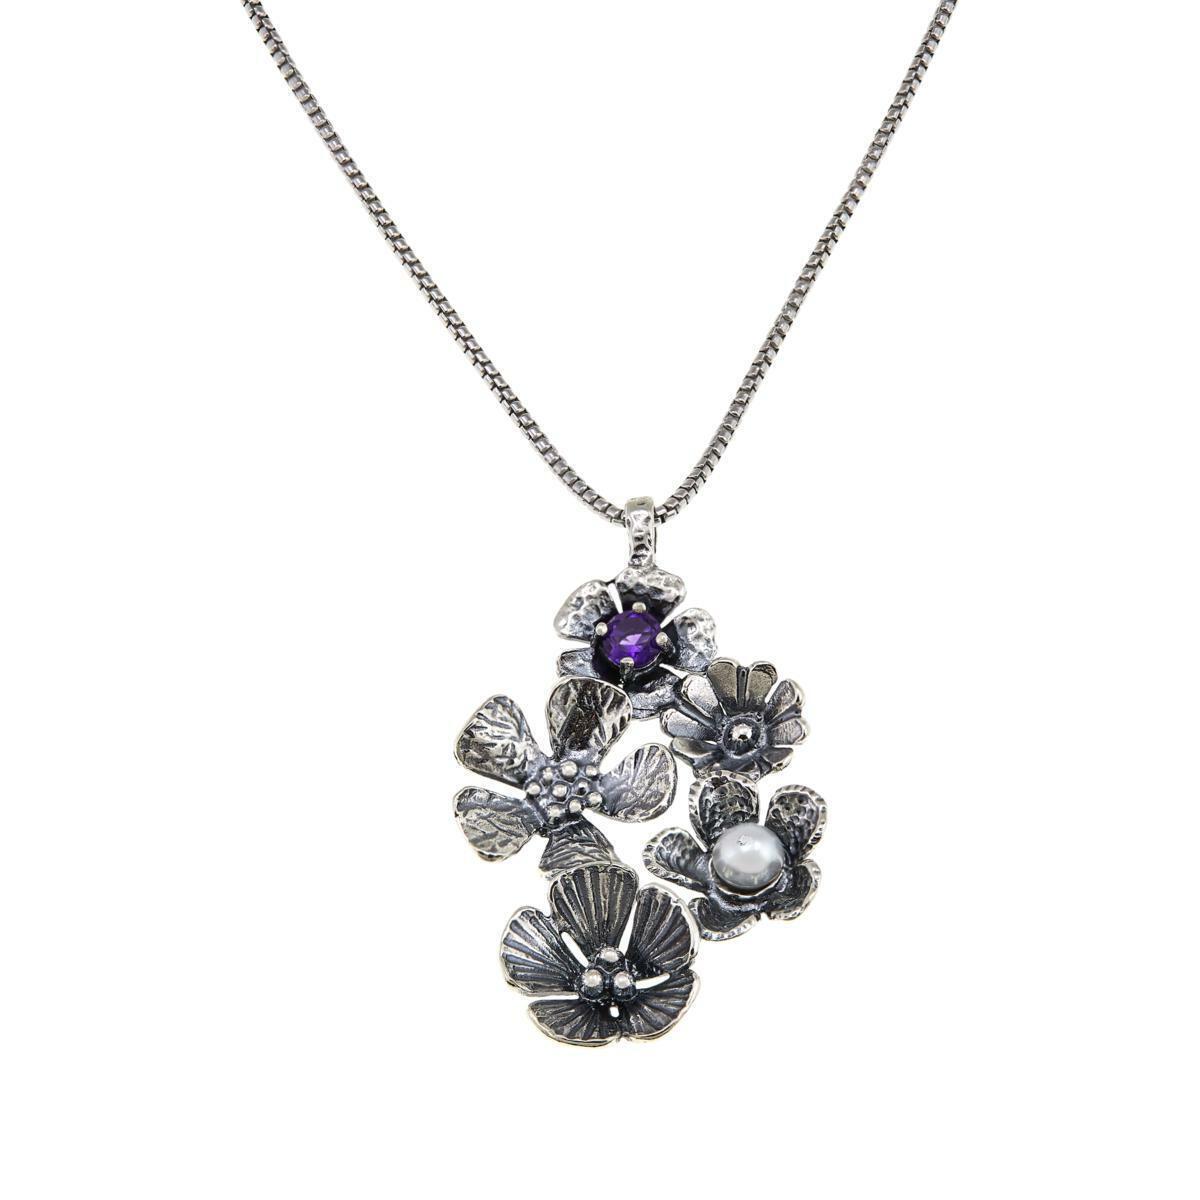 LiPaz Amethyst and Cultured Pearl Floral Pendant & 18" Necklace